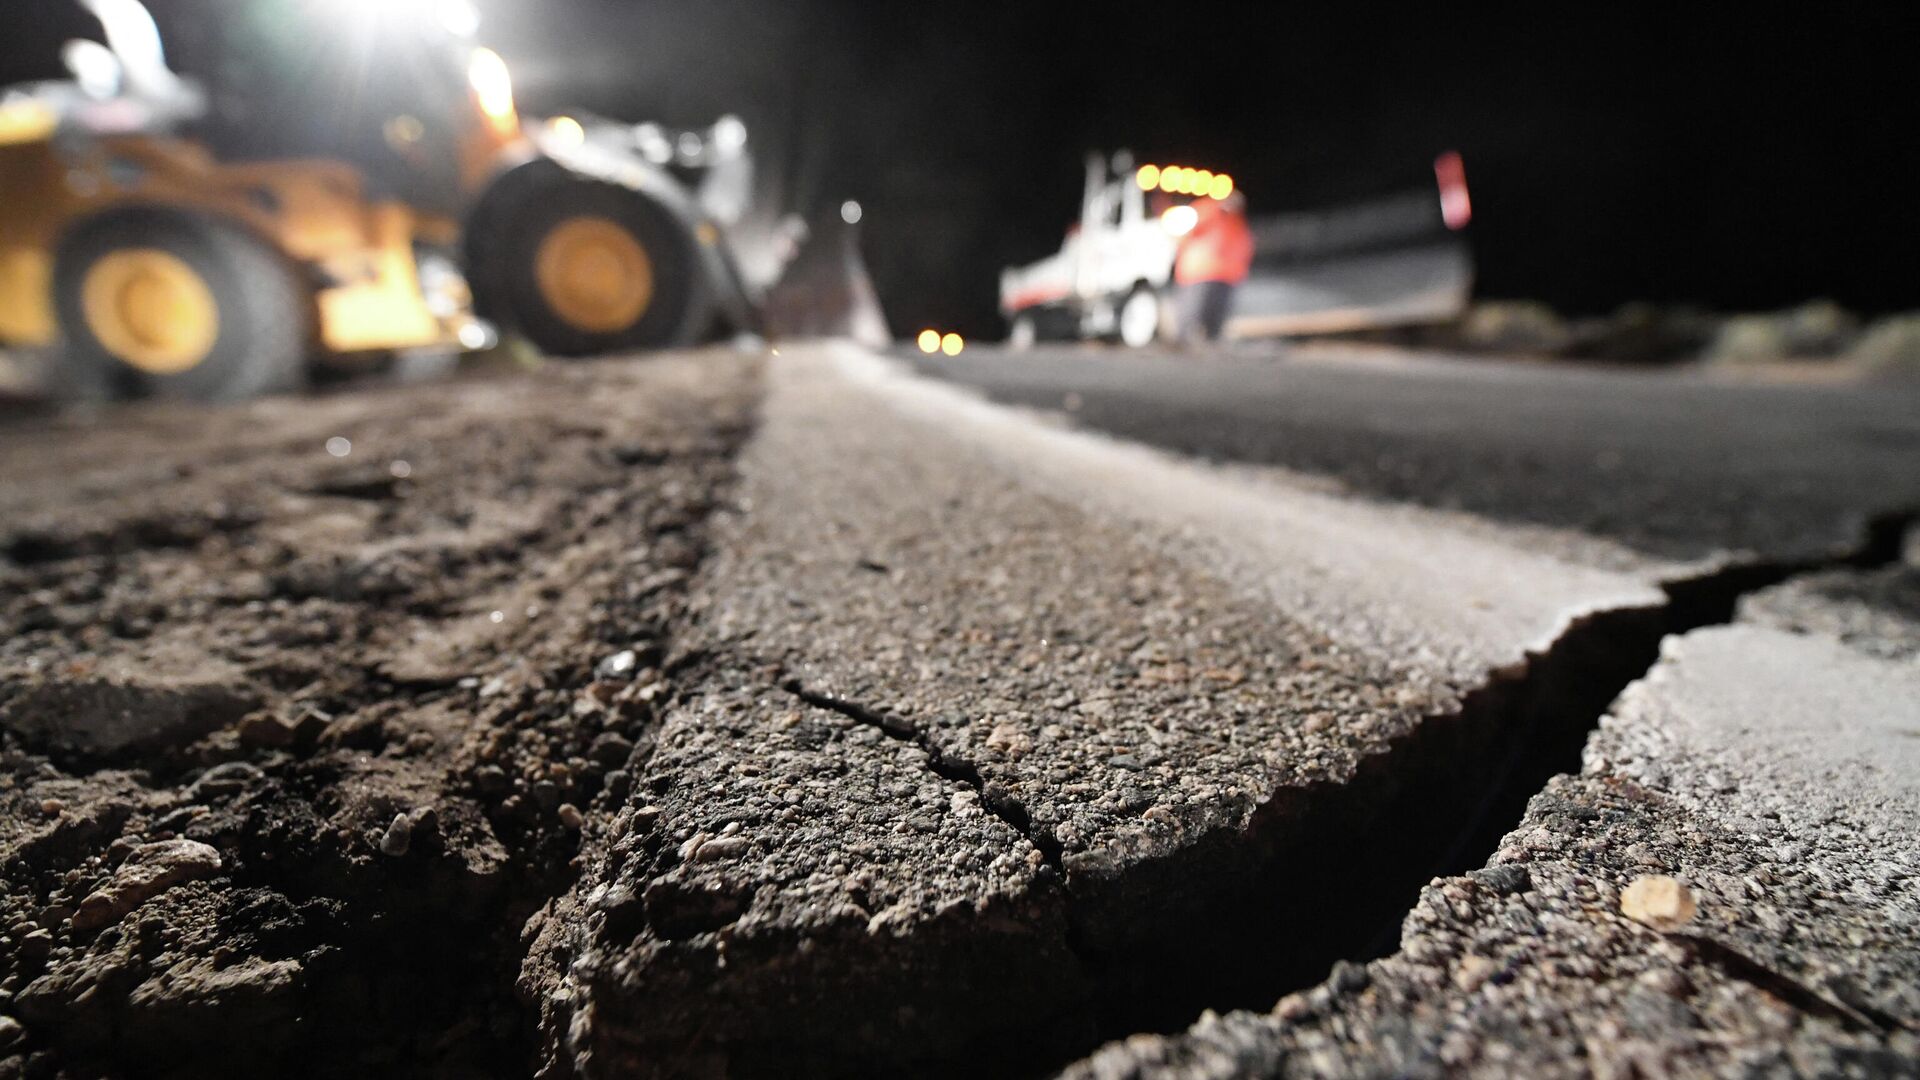 Highway workers repair a hole that opened in the road as a result of the July 5, 2019 earthquake, in Ridgecrest, California, about 150 miles (241km) north of Los Angeles, early in the morning on July 6, 2019 - Sputnik International, 1920, 05.03.2022